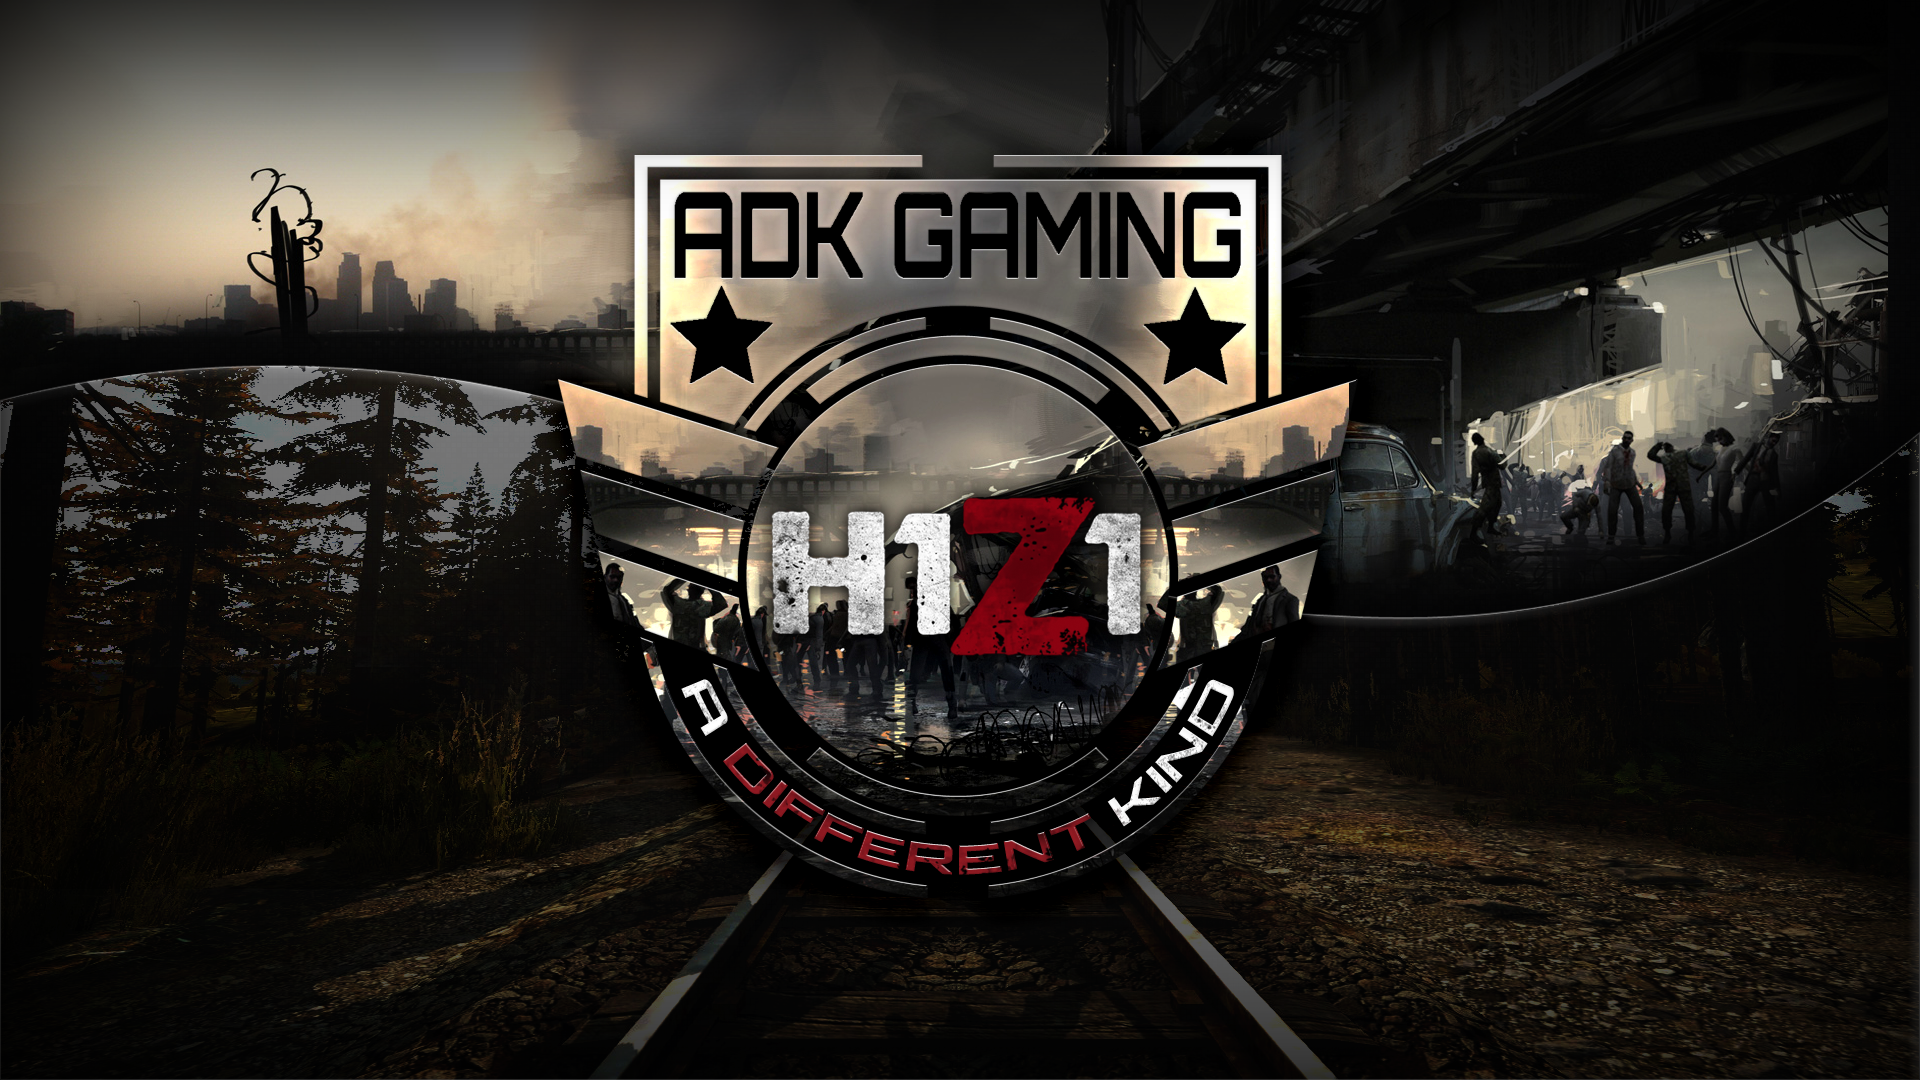 h1z1 wallpaper,pc game,games,shooter game,font,adventure game